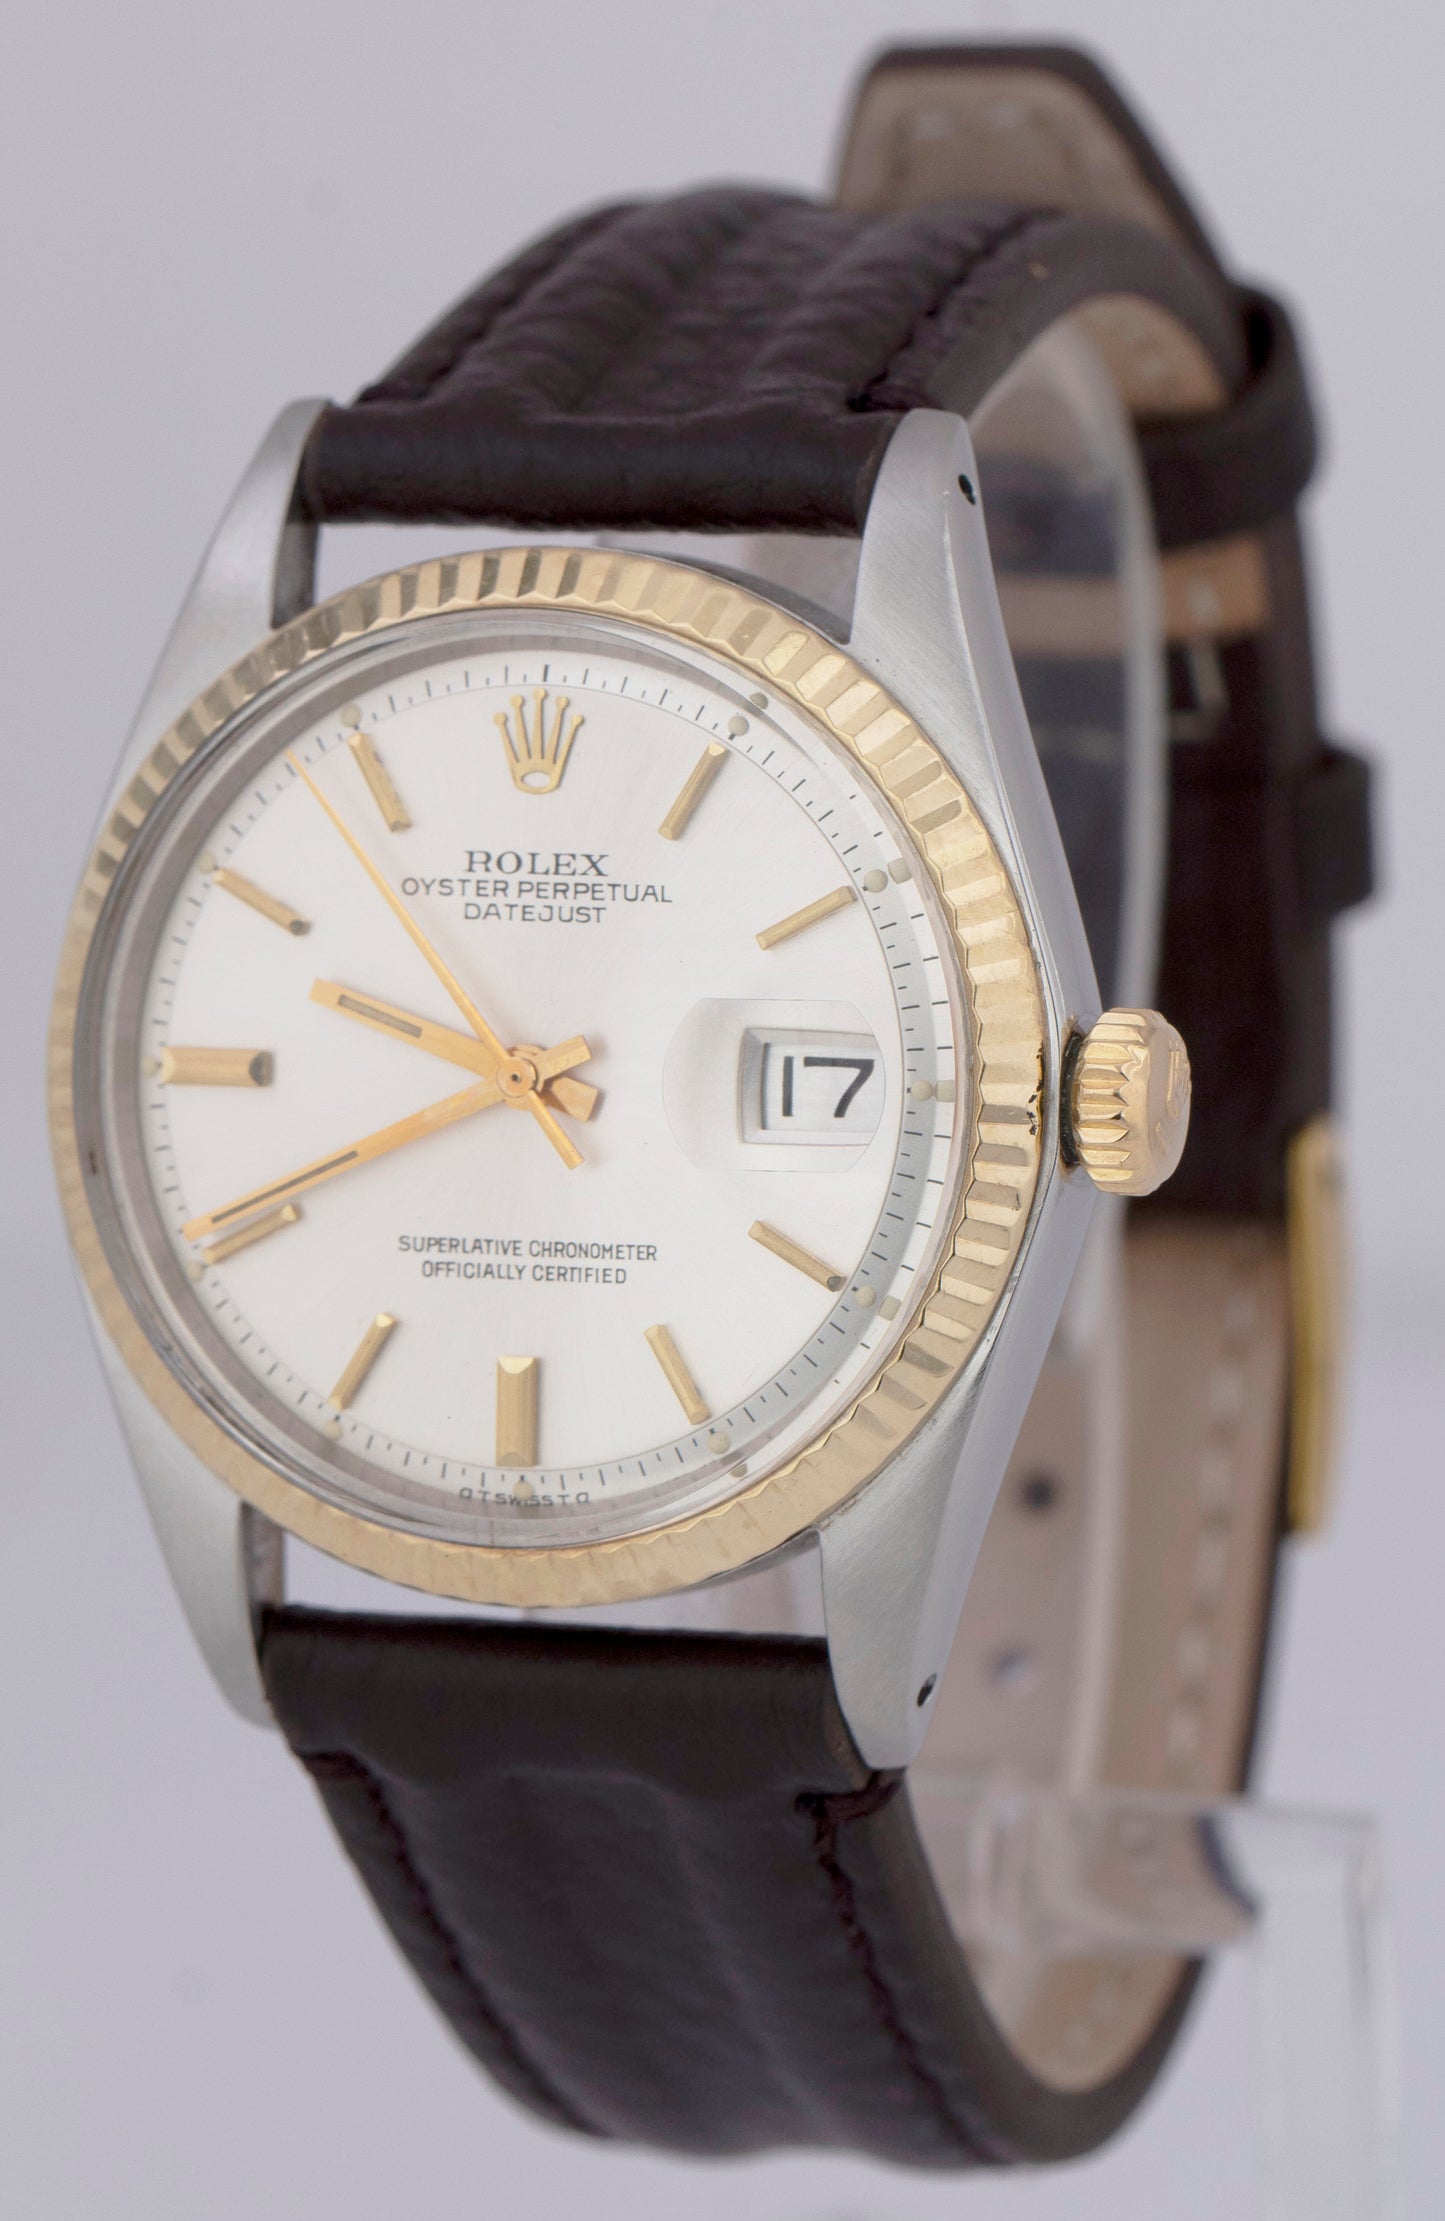 Rolex DateJust 36mm Silver Pie-Pan Sigma Dial 18K Yellow Gold Fluted Watch 1601